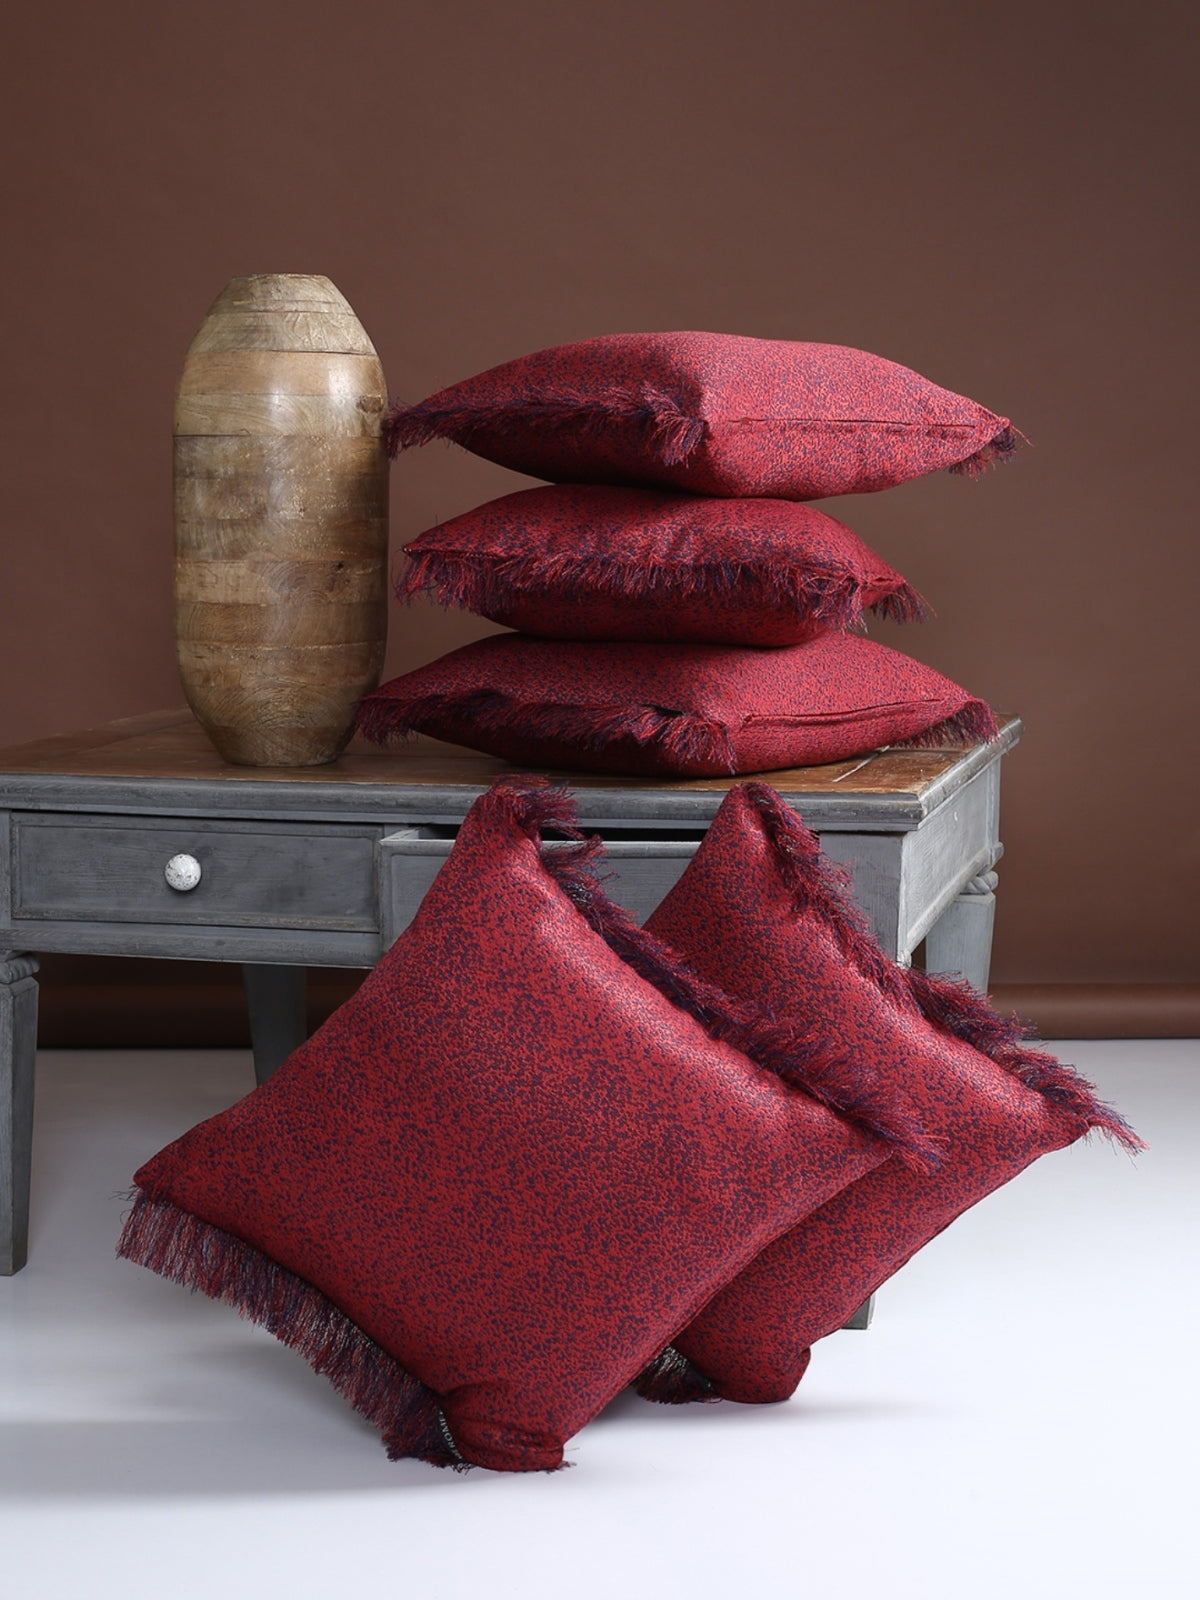 Soft Polyester Textured Designer Plain Cushion Covers 16 inch x 16 inch Set of 5 - Maroon